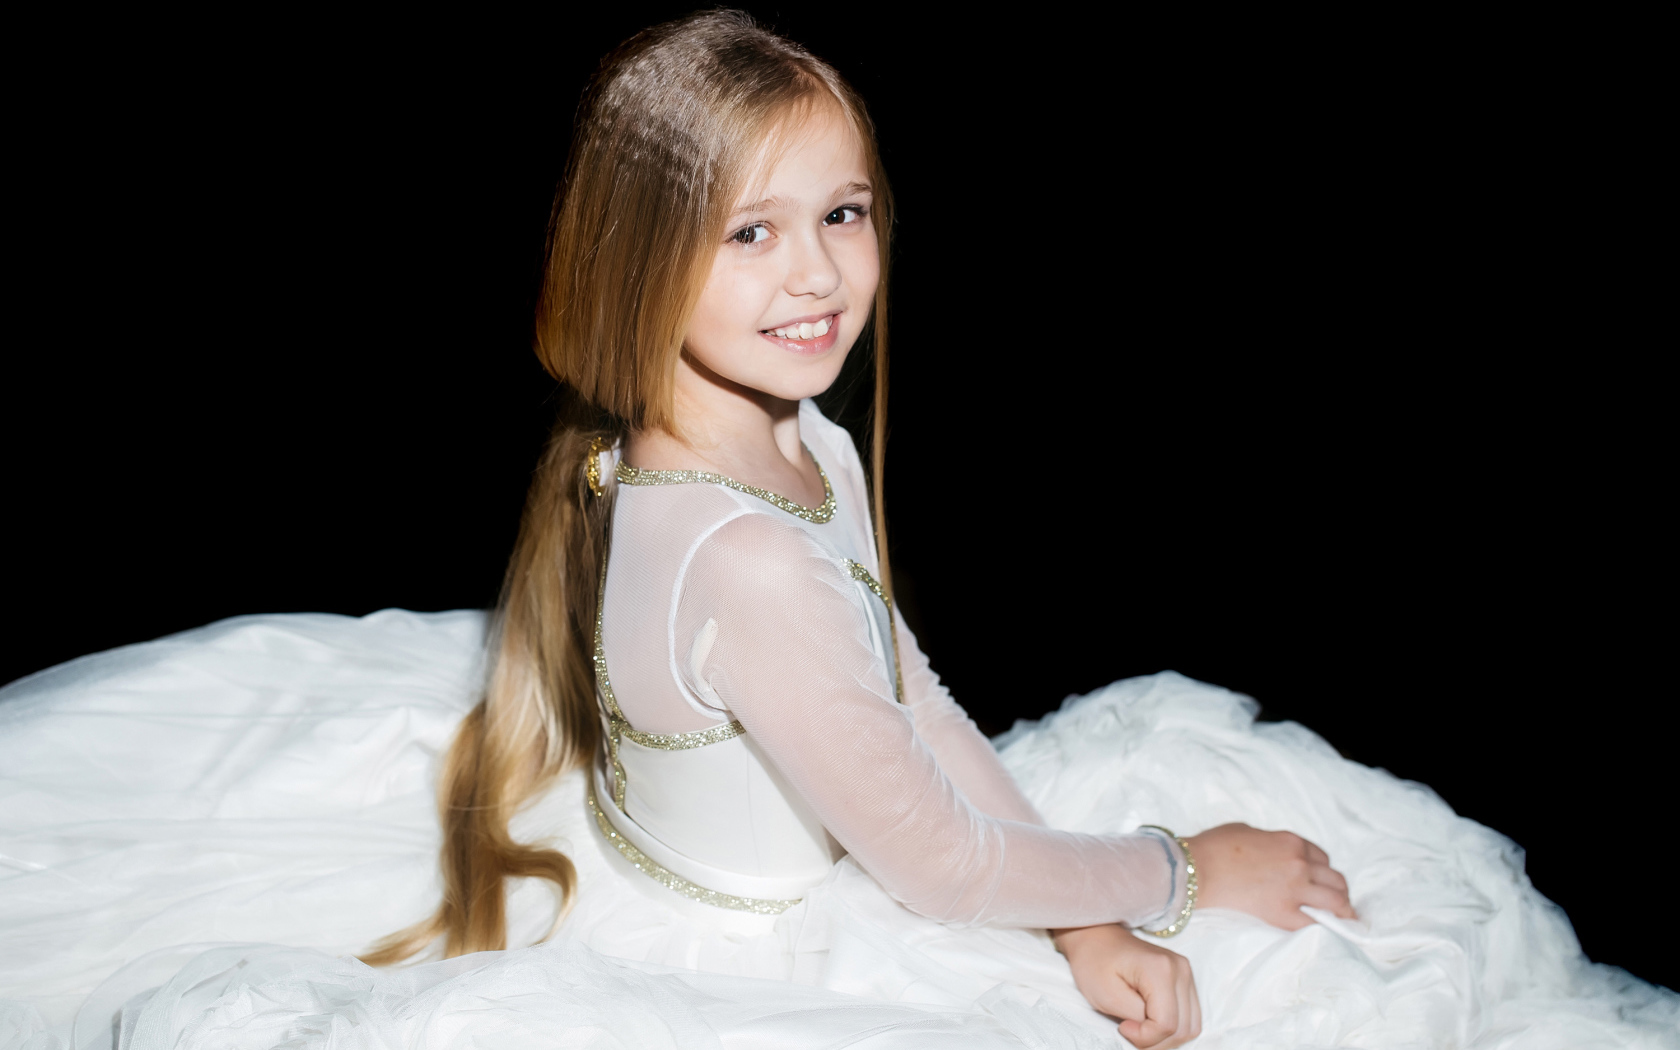 Smiling girl in a beautiful white dress on a black background